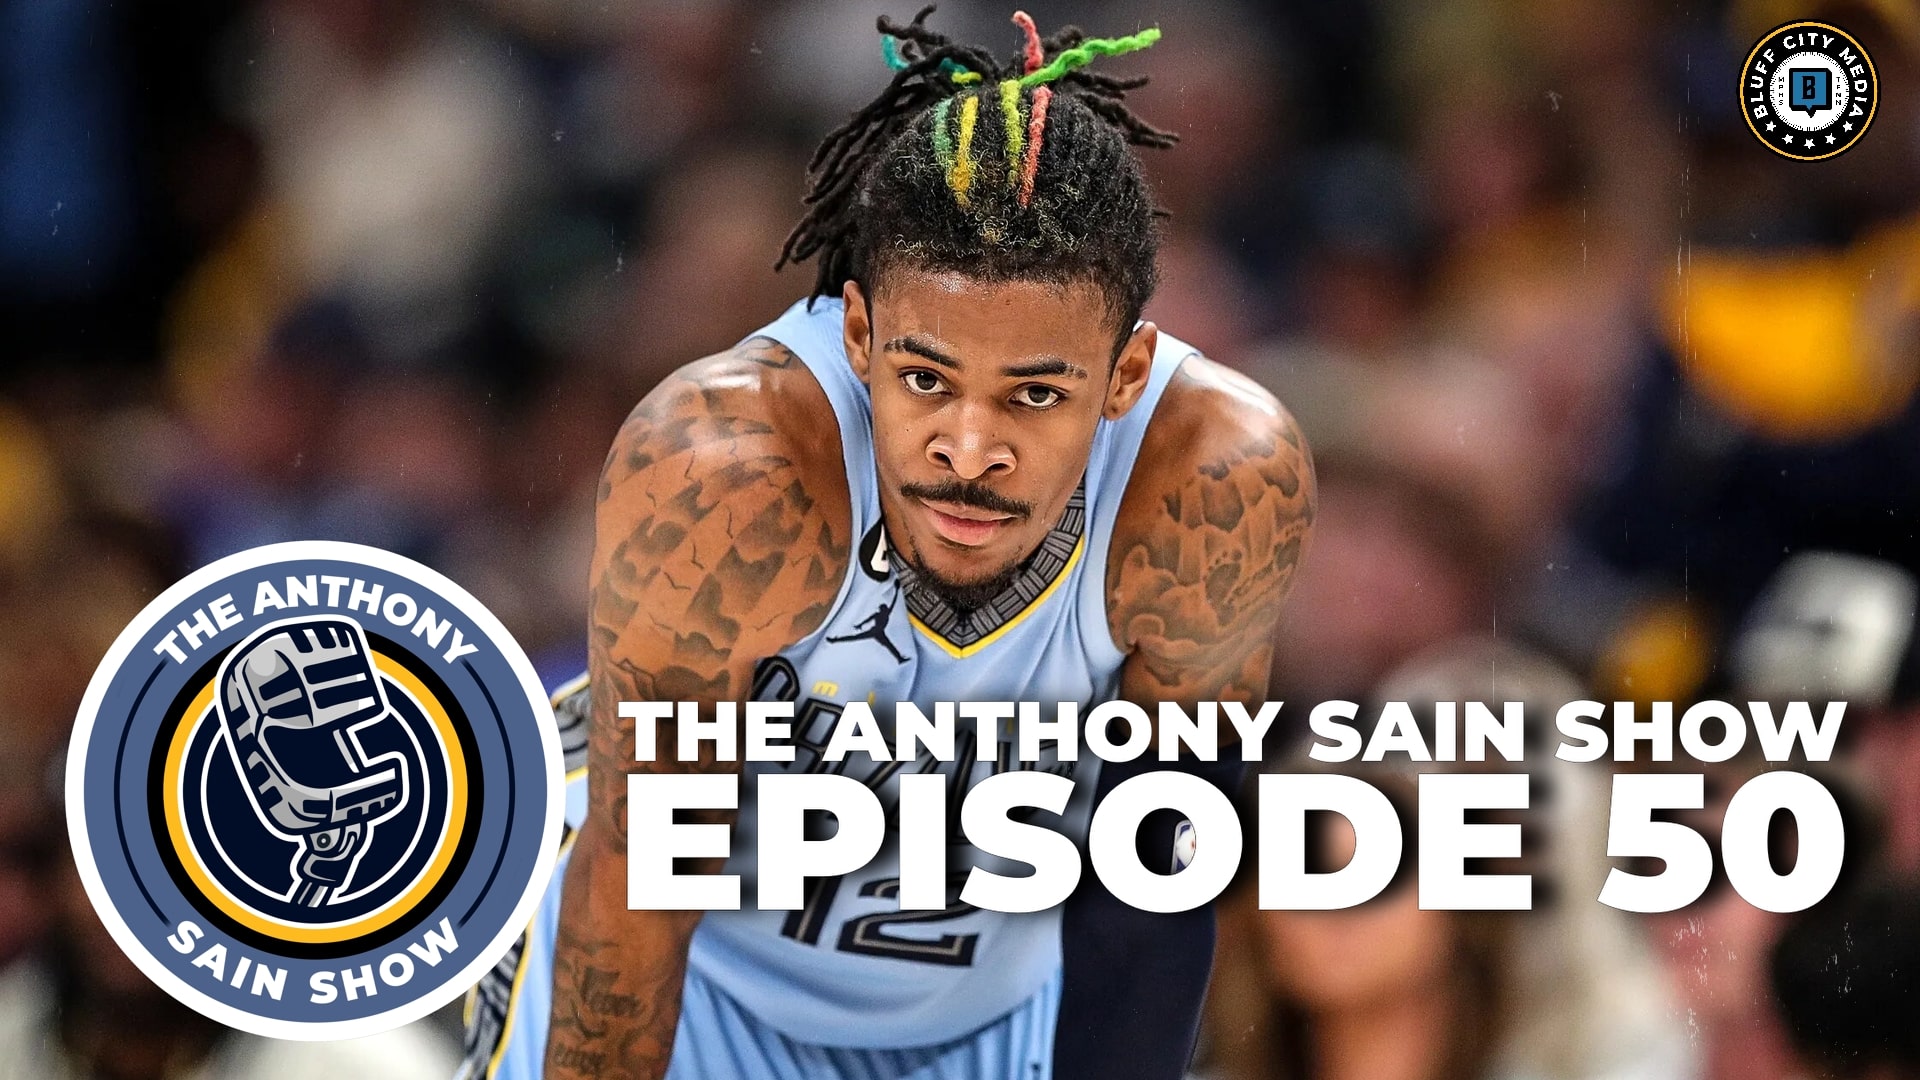 Featured image for “The Anthony Sain Show Ep 50: Memphis City Council & the SBLS; Grizzlies’ Front Office Moves”